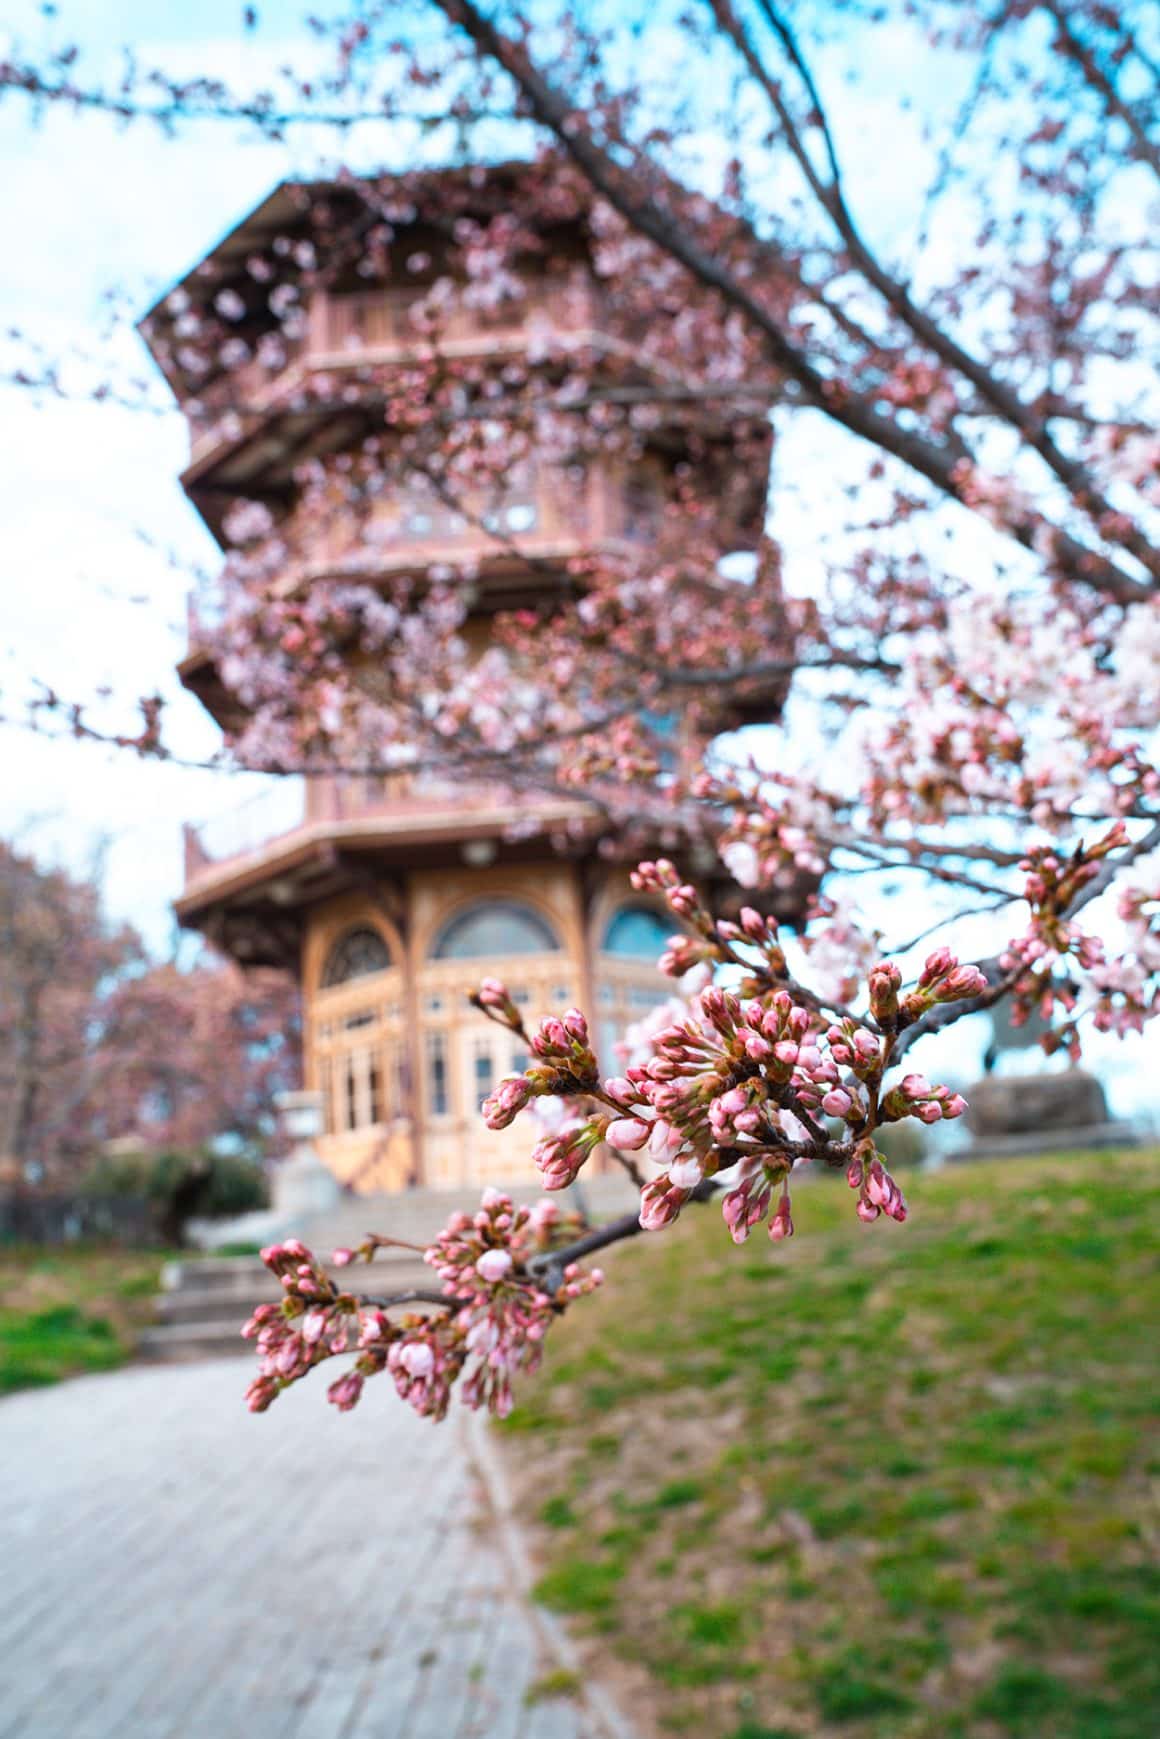 Patterson Park cherry blossom trees near the pagoda in Baltimore, MD